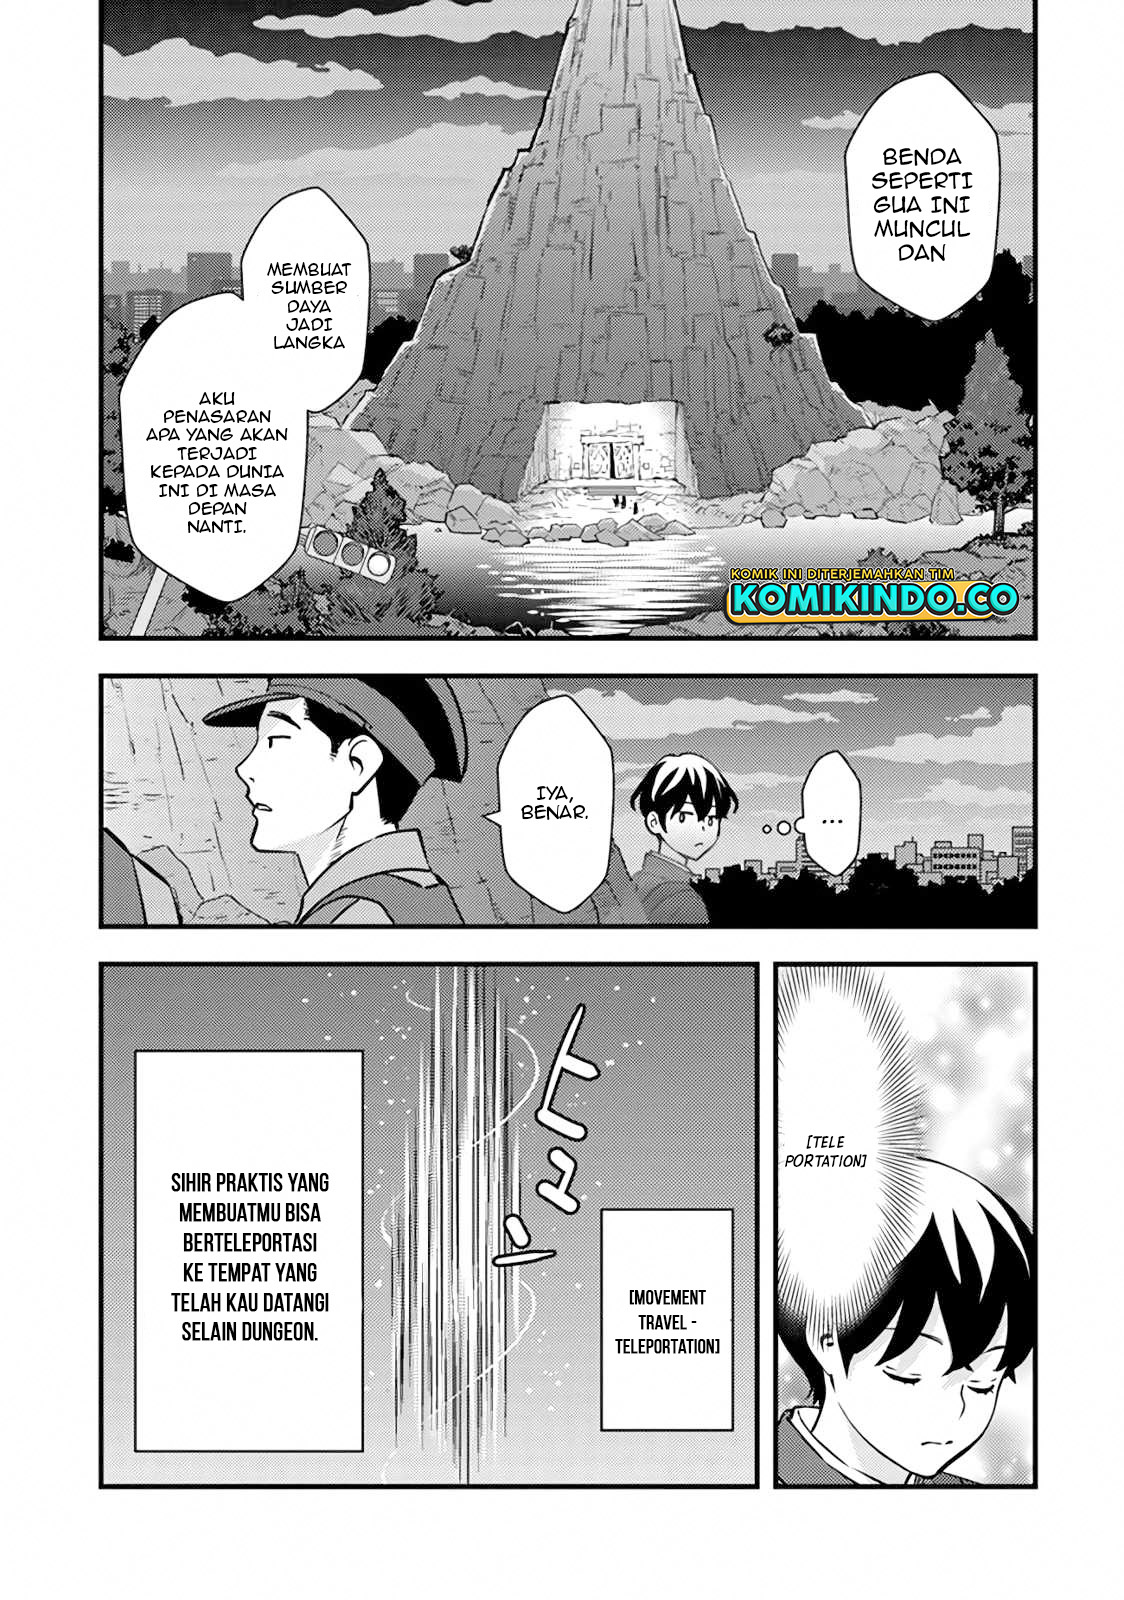 The Hero Returns From Another World Chapter 02-1